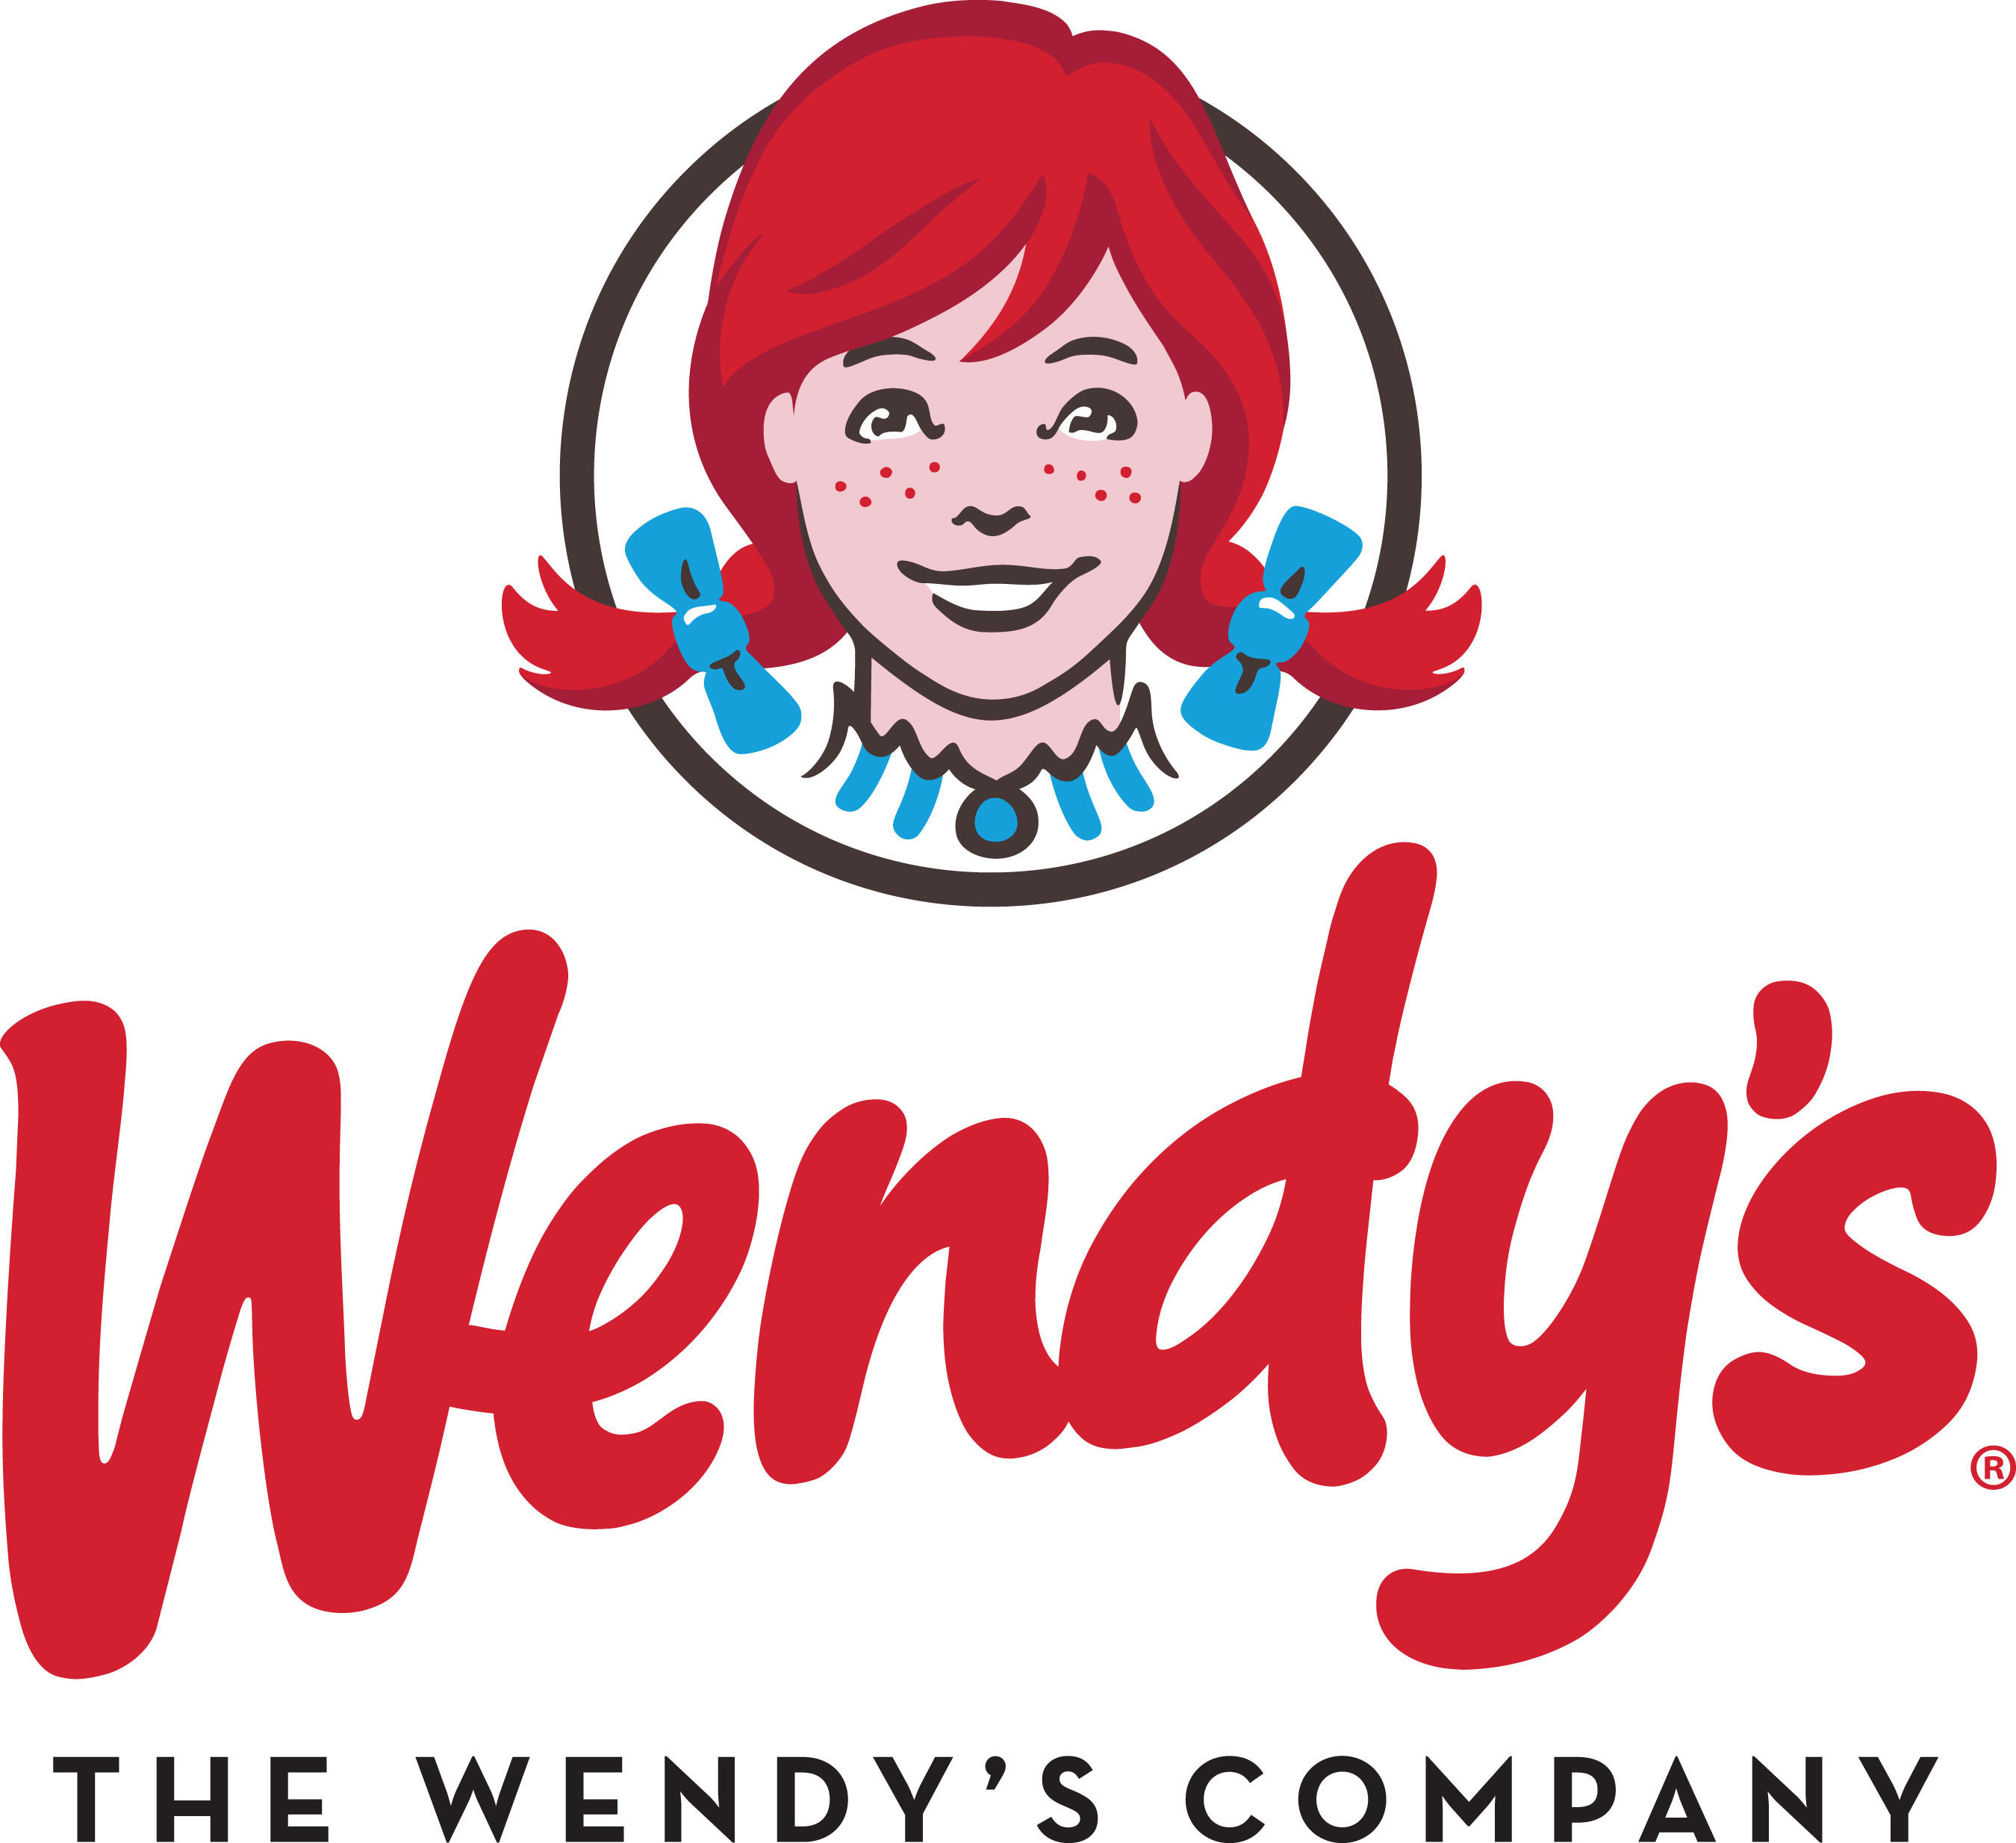 The Wendy's Company is the world's third-largest quick-service hamburger company. The Wendy's system includes approximately 6,500 franchise and Company-operated restaurants in the United States and 28 countries and U.S. territories worldwide. For more information, visit aboutwendys.com or wendys.com.